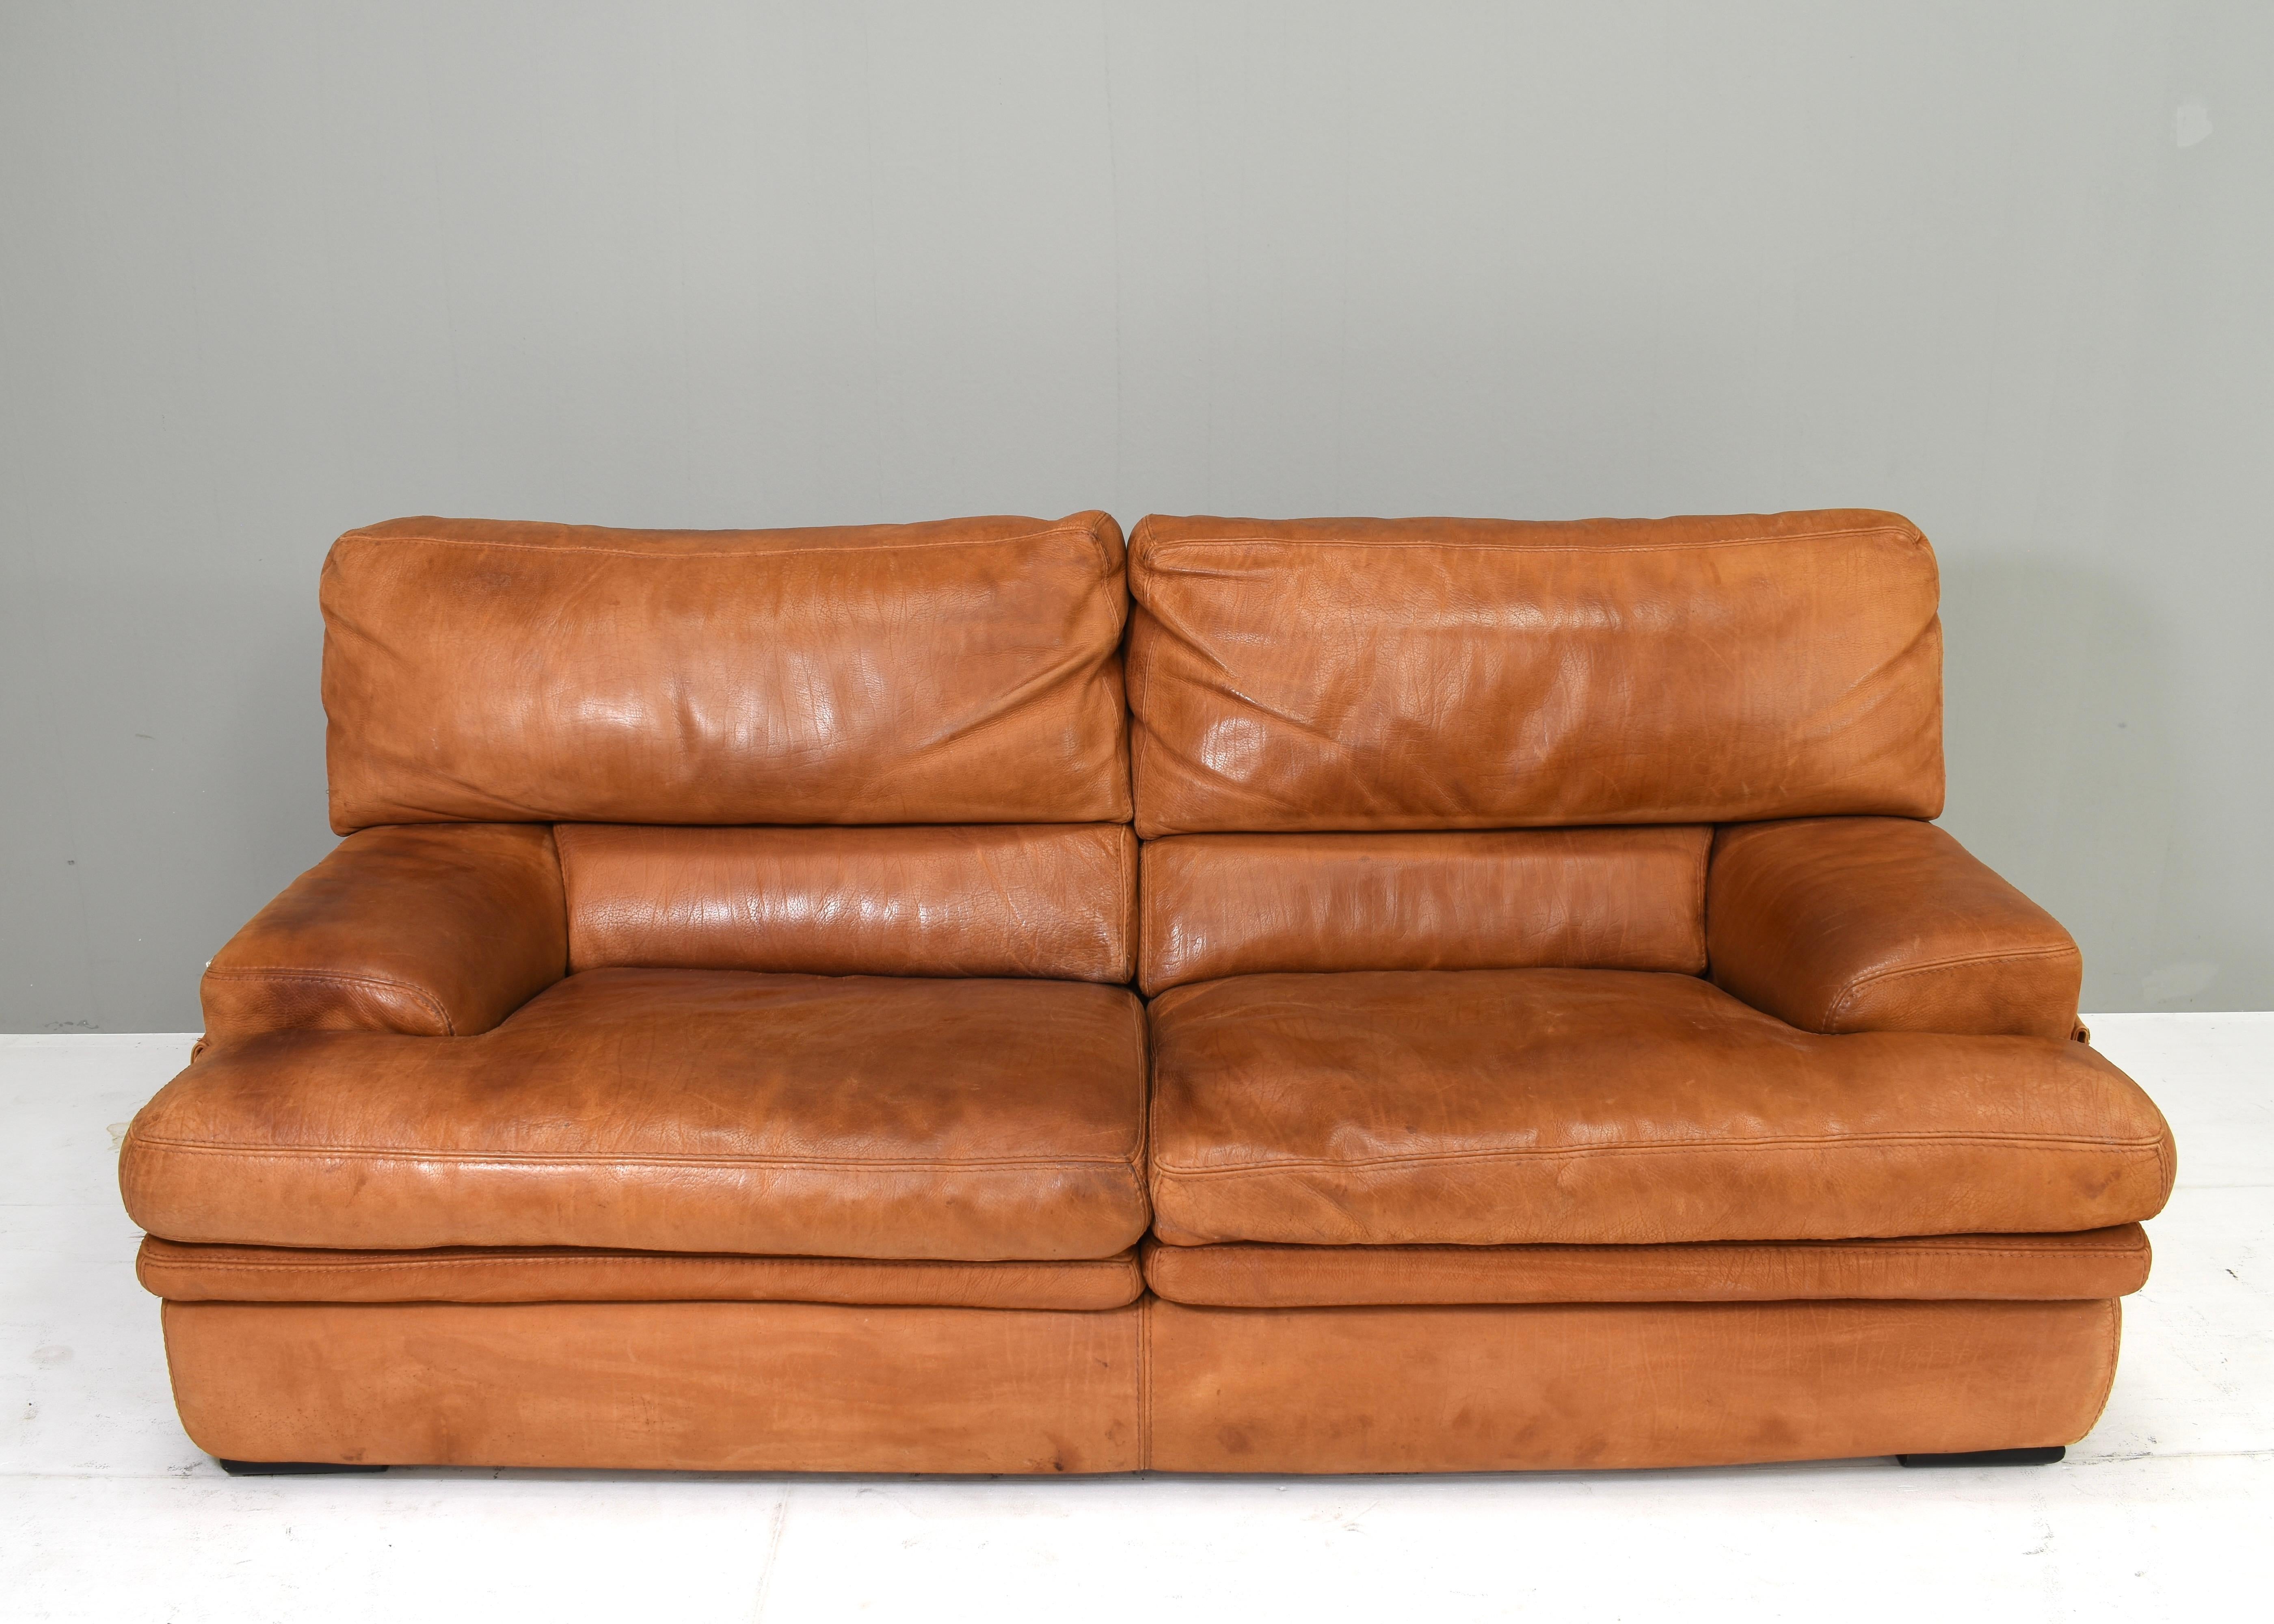 Roche Bobois sofa in patinated Tan / Cognac leather – France, circa 1970/80 For Sale 3